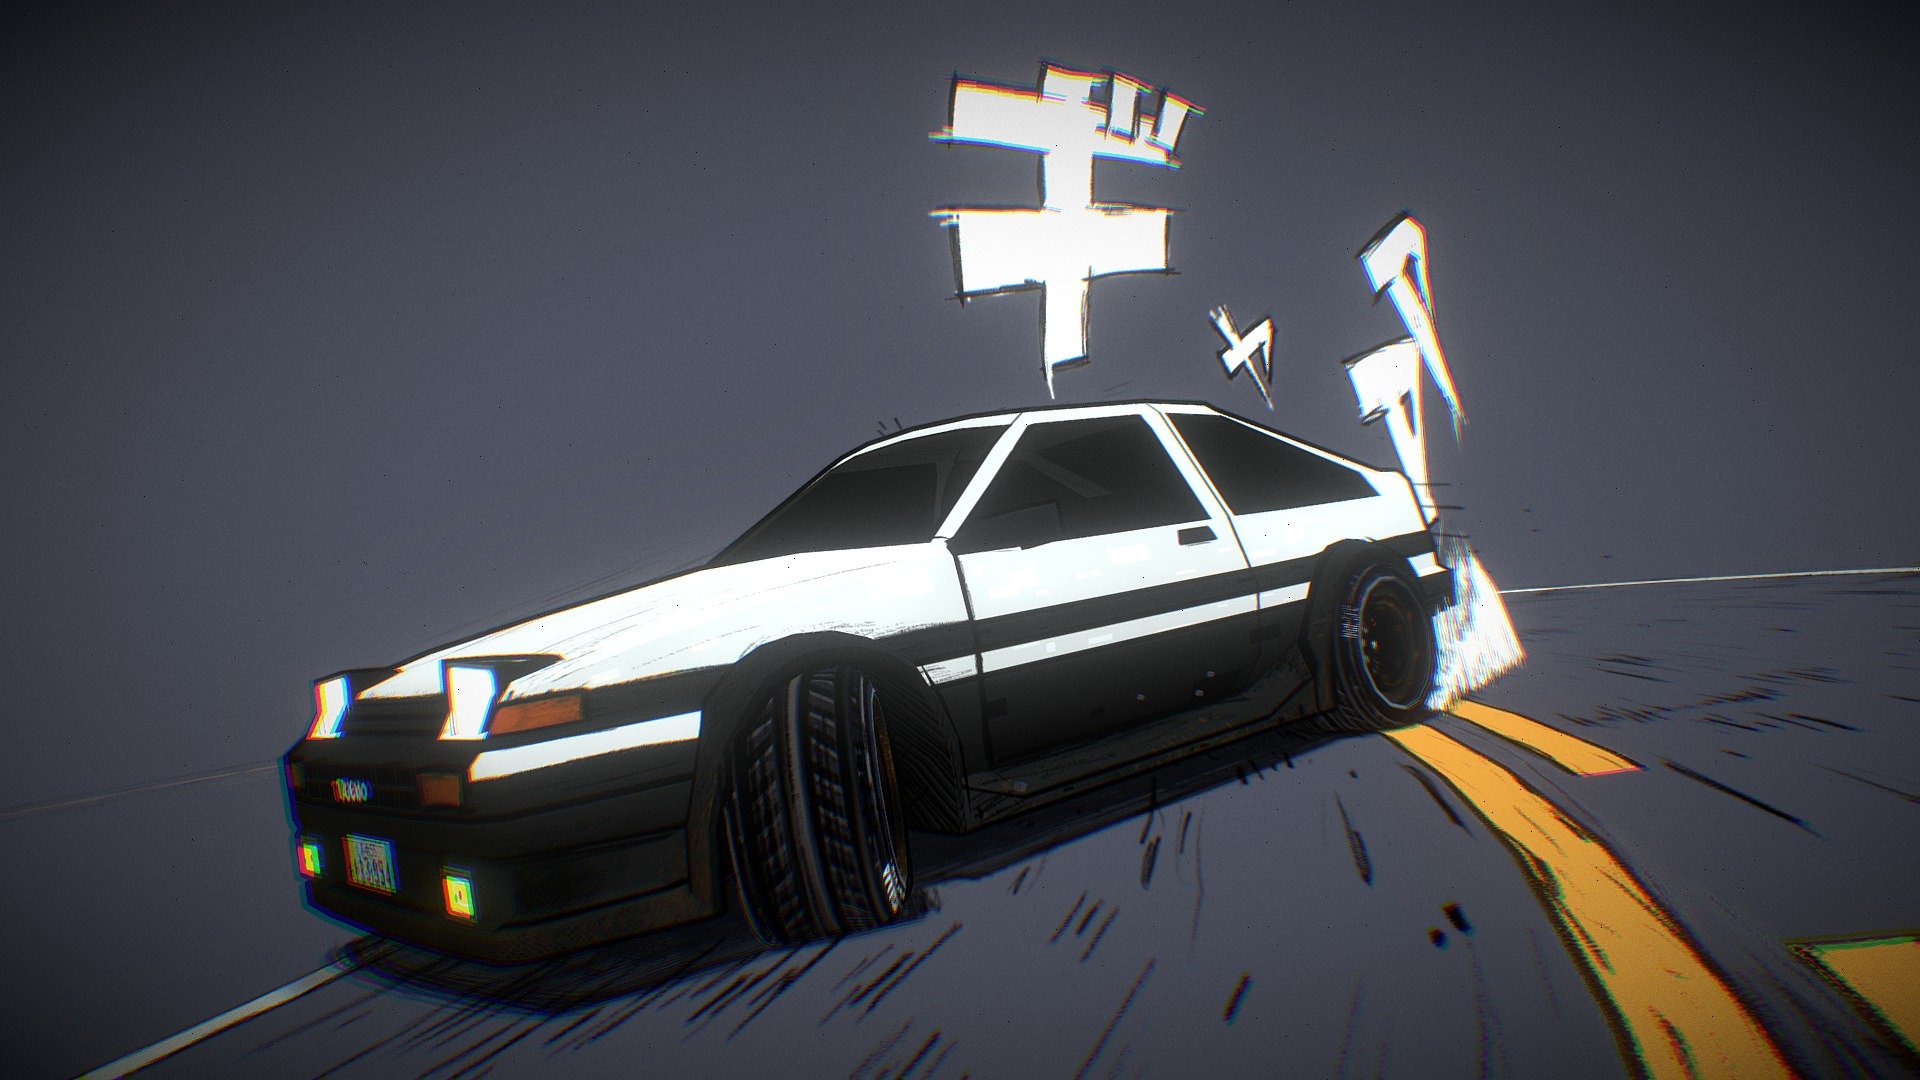 Here is the animated version of a drifting Toyota AE86 Trueno I made for the #SketchfabWeeklyChallenge that you can find here : https://skfb.ly/owOCA

I also took the opportunity to fix some problems in the model that I saw afterwards ^^. Nobody will see the difference, but it's good for my picky side :p

I wanted to get closer to a NPR/Sketchy/Manga look even in the animation.

Enjoy! - Drifting AE86 - Slow Motion Animated Version - 3D model by FoG Ryû (@FoG-Sketchfab) 3d model